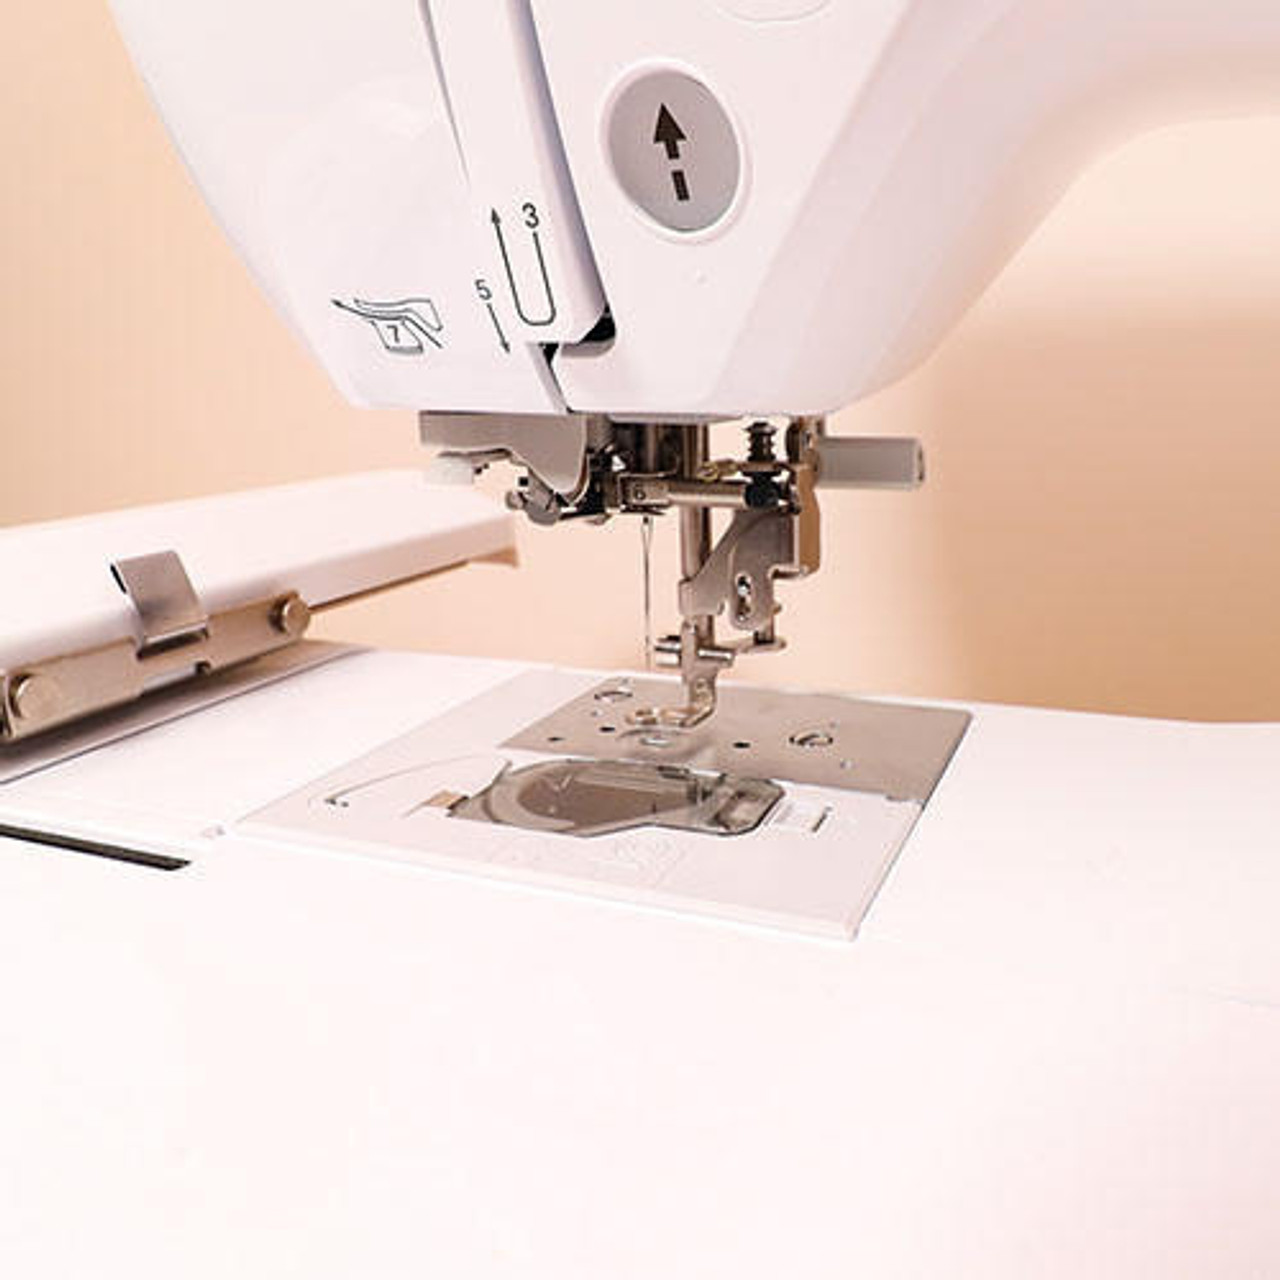 Brother PE900 Computerized Embroidery Machine - SewingnMore by